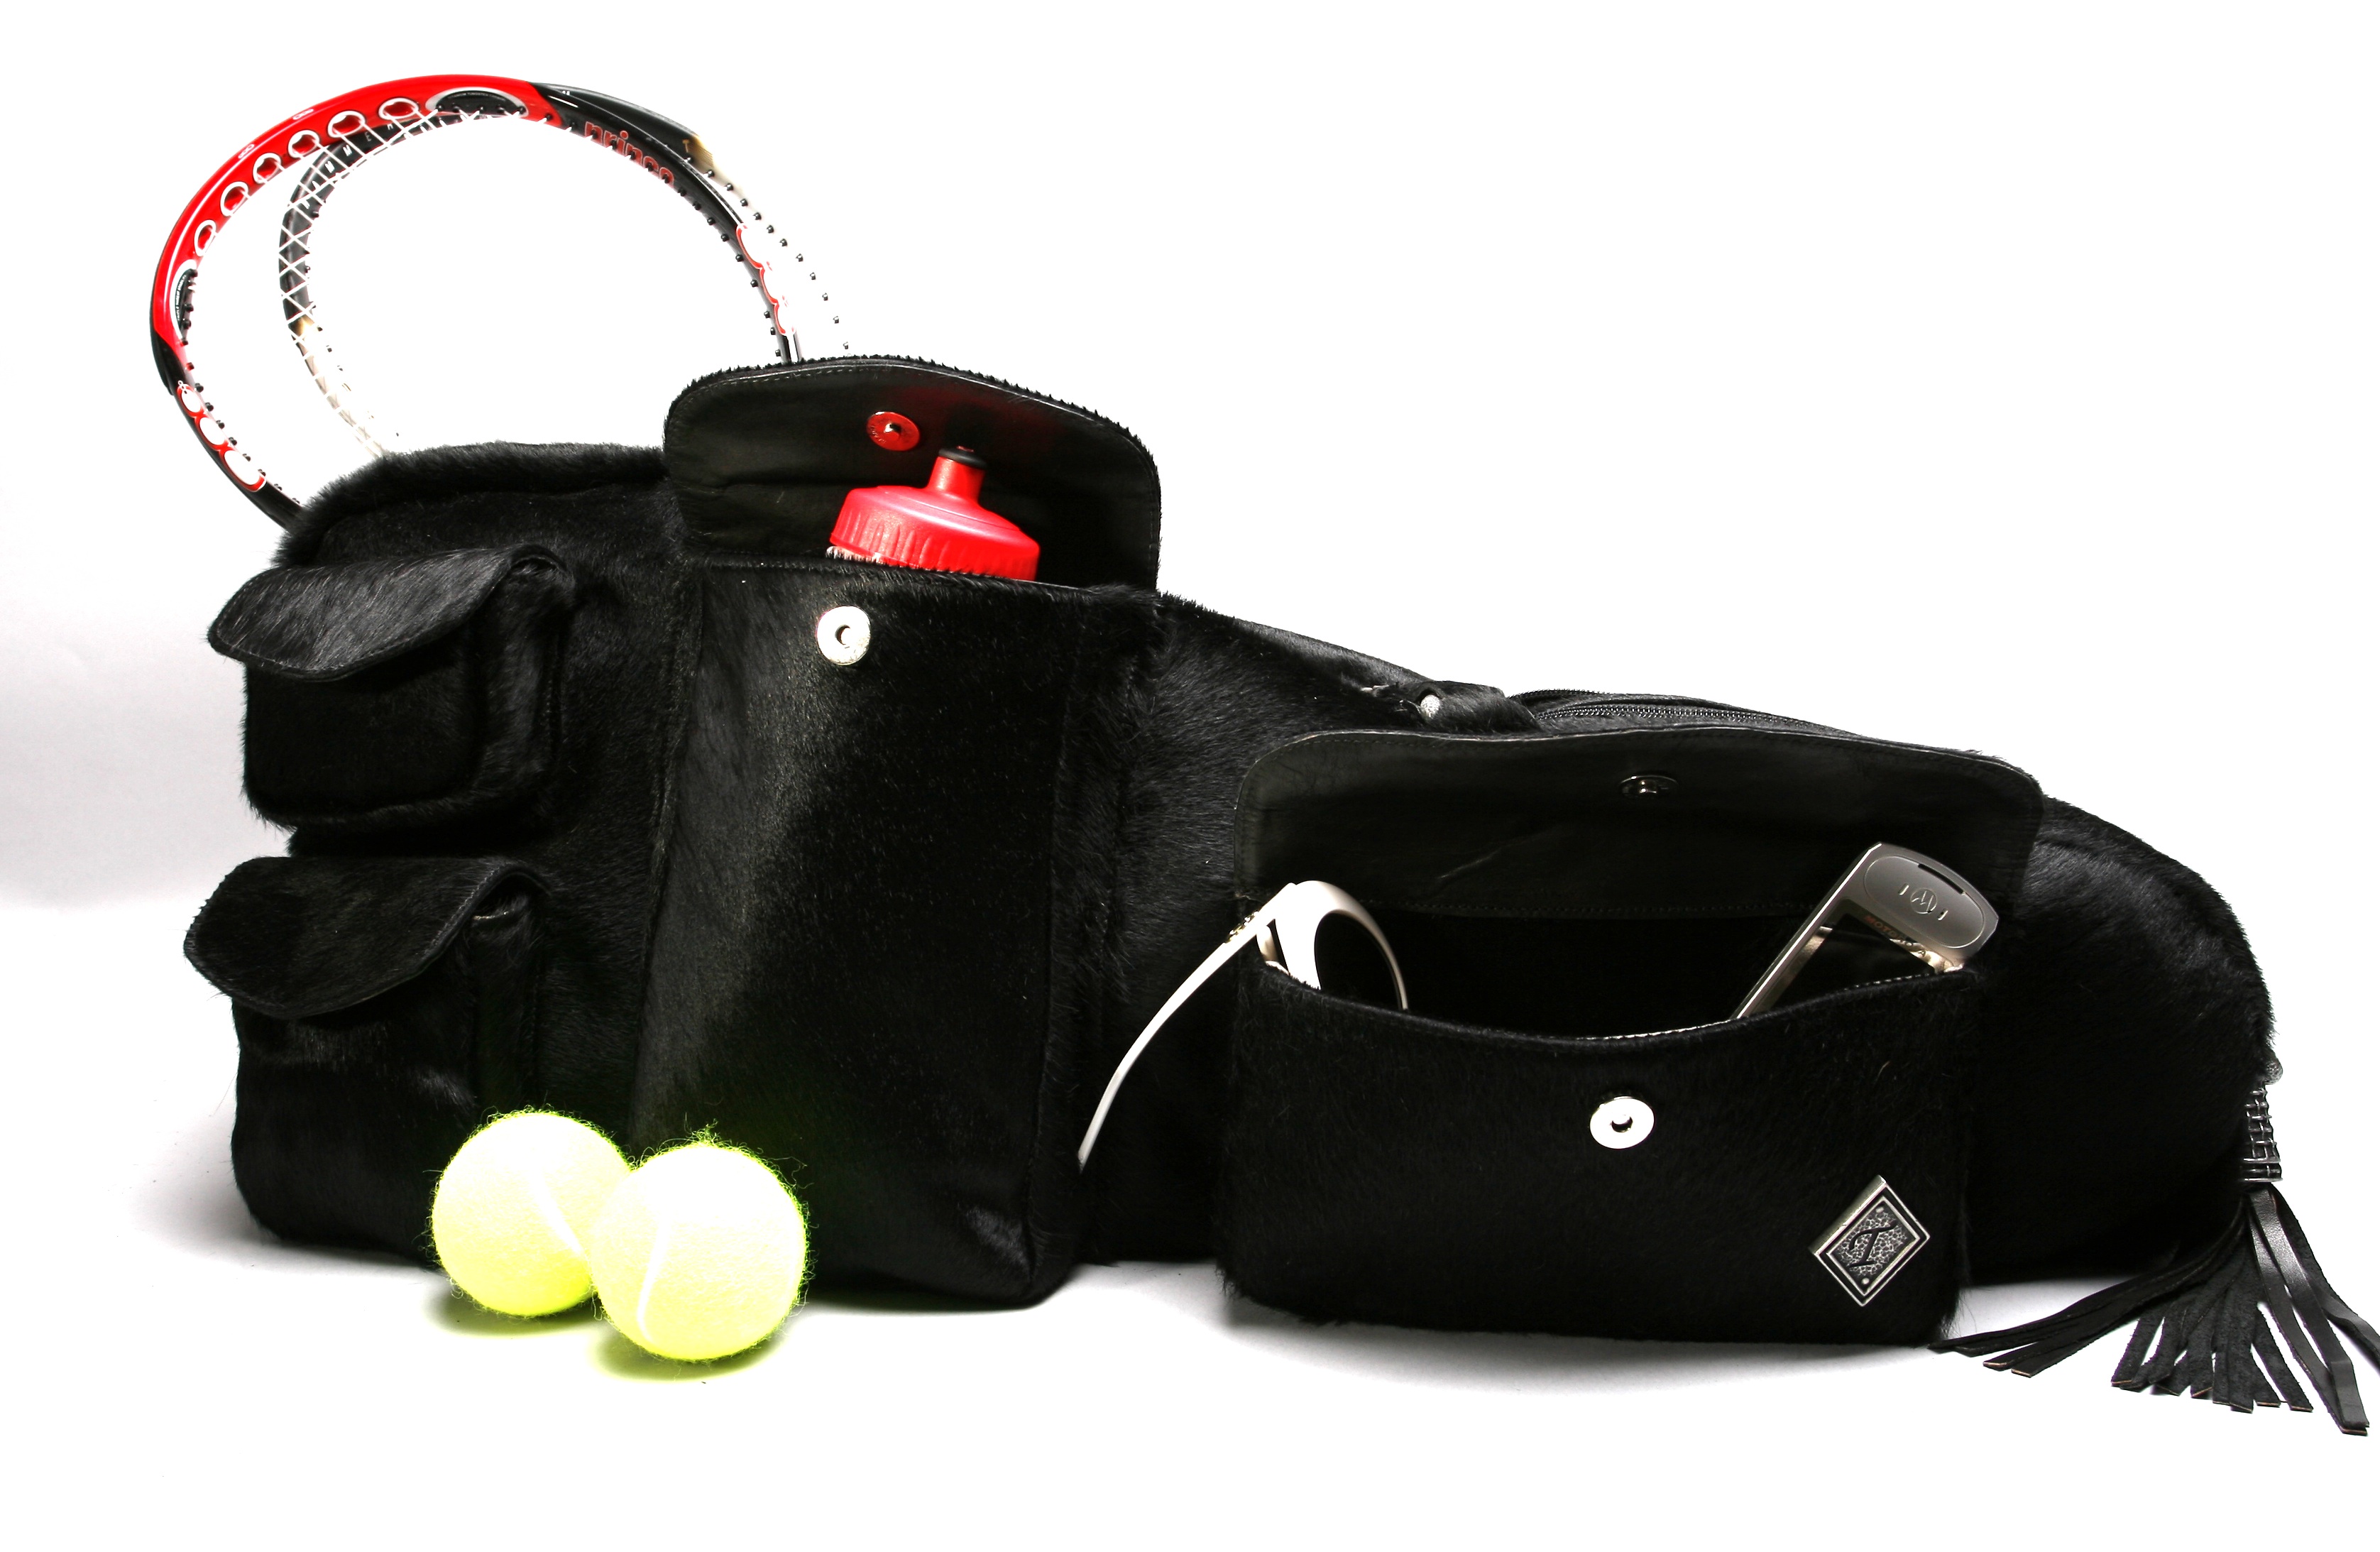 Traci Bags Launches Luxury Tennis Bag and Handbag Collection